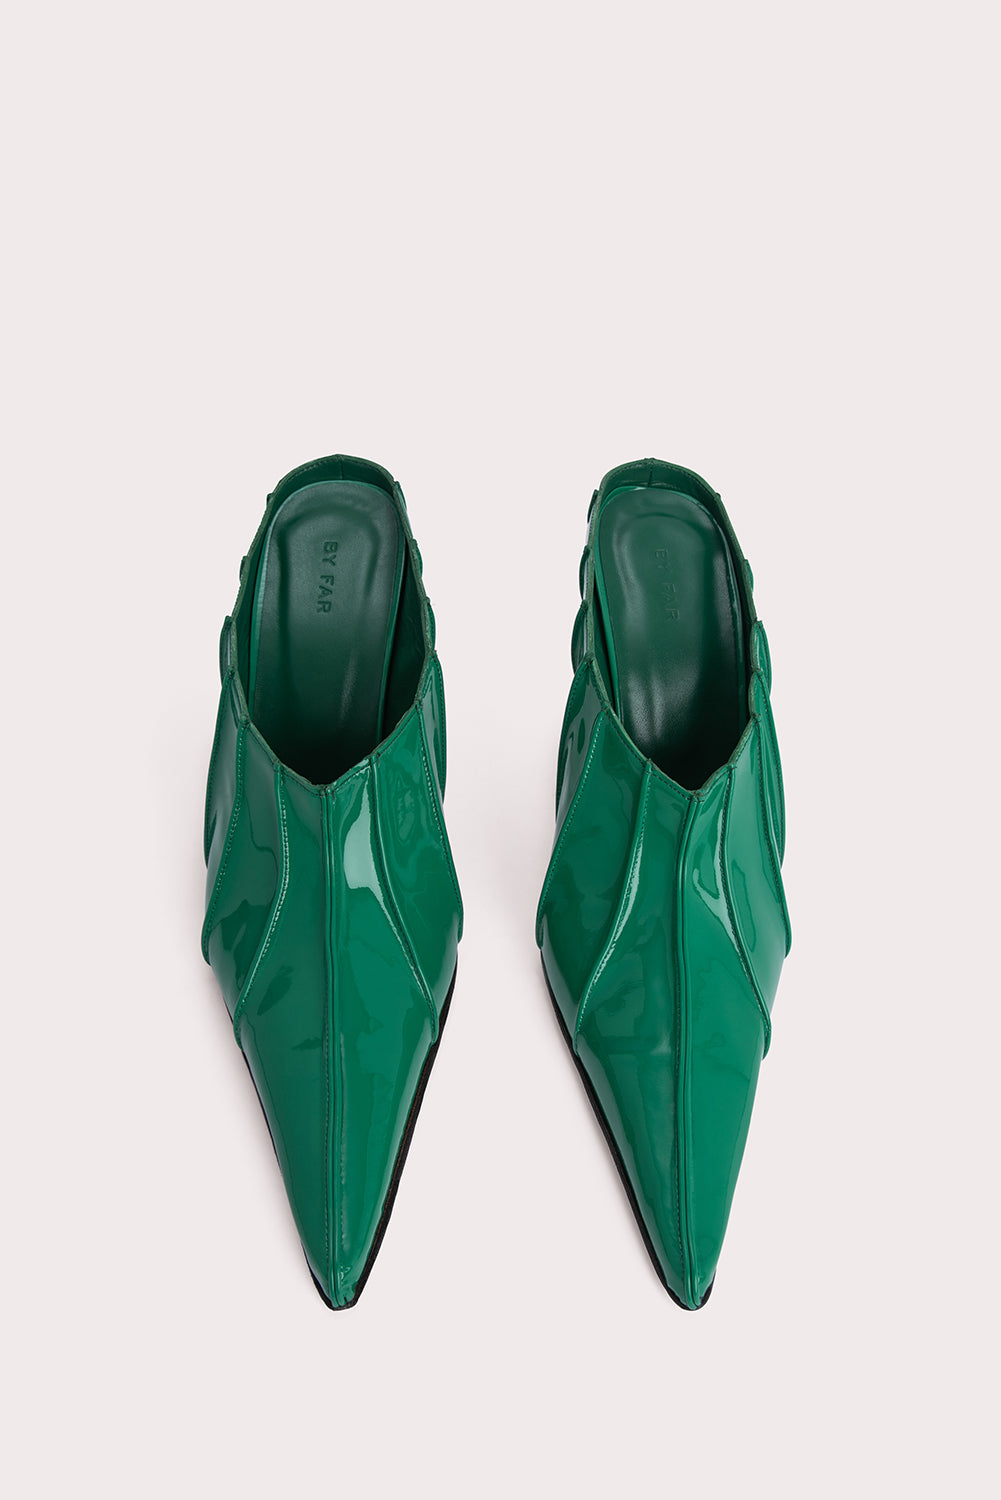 Trish Clover Green Patent Leather